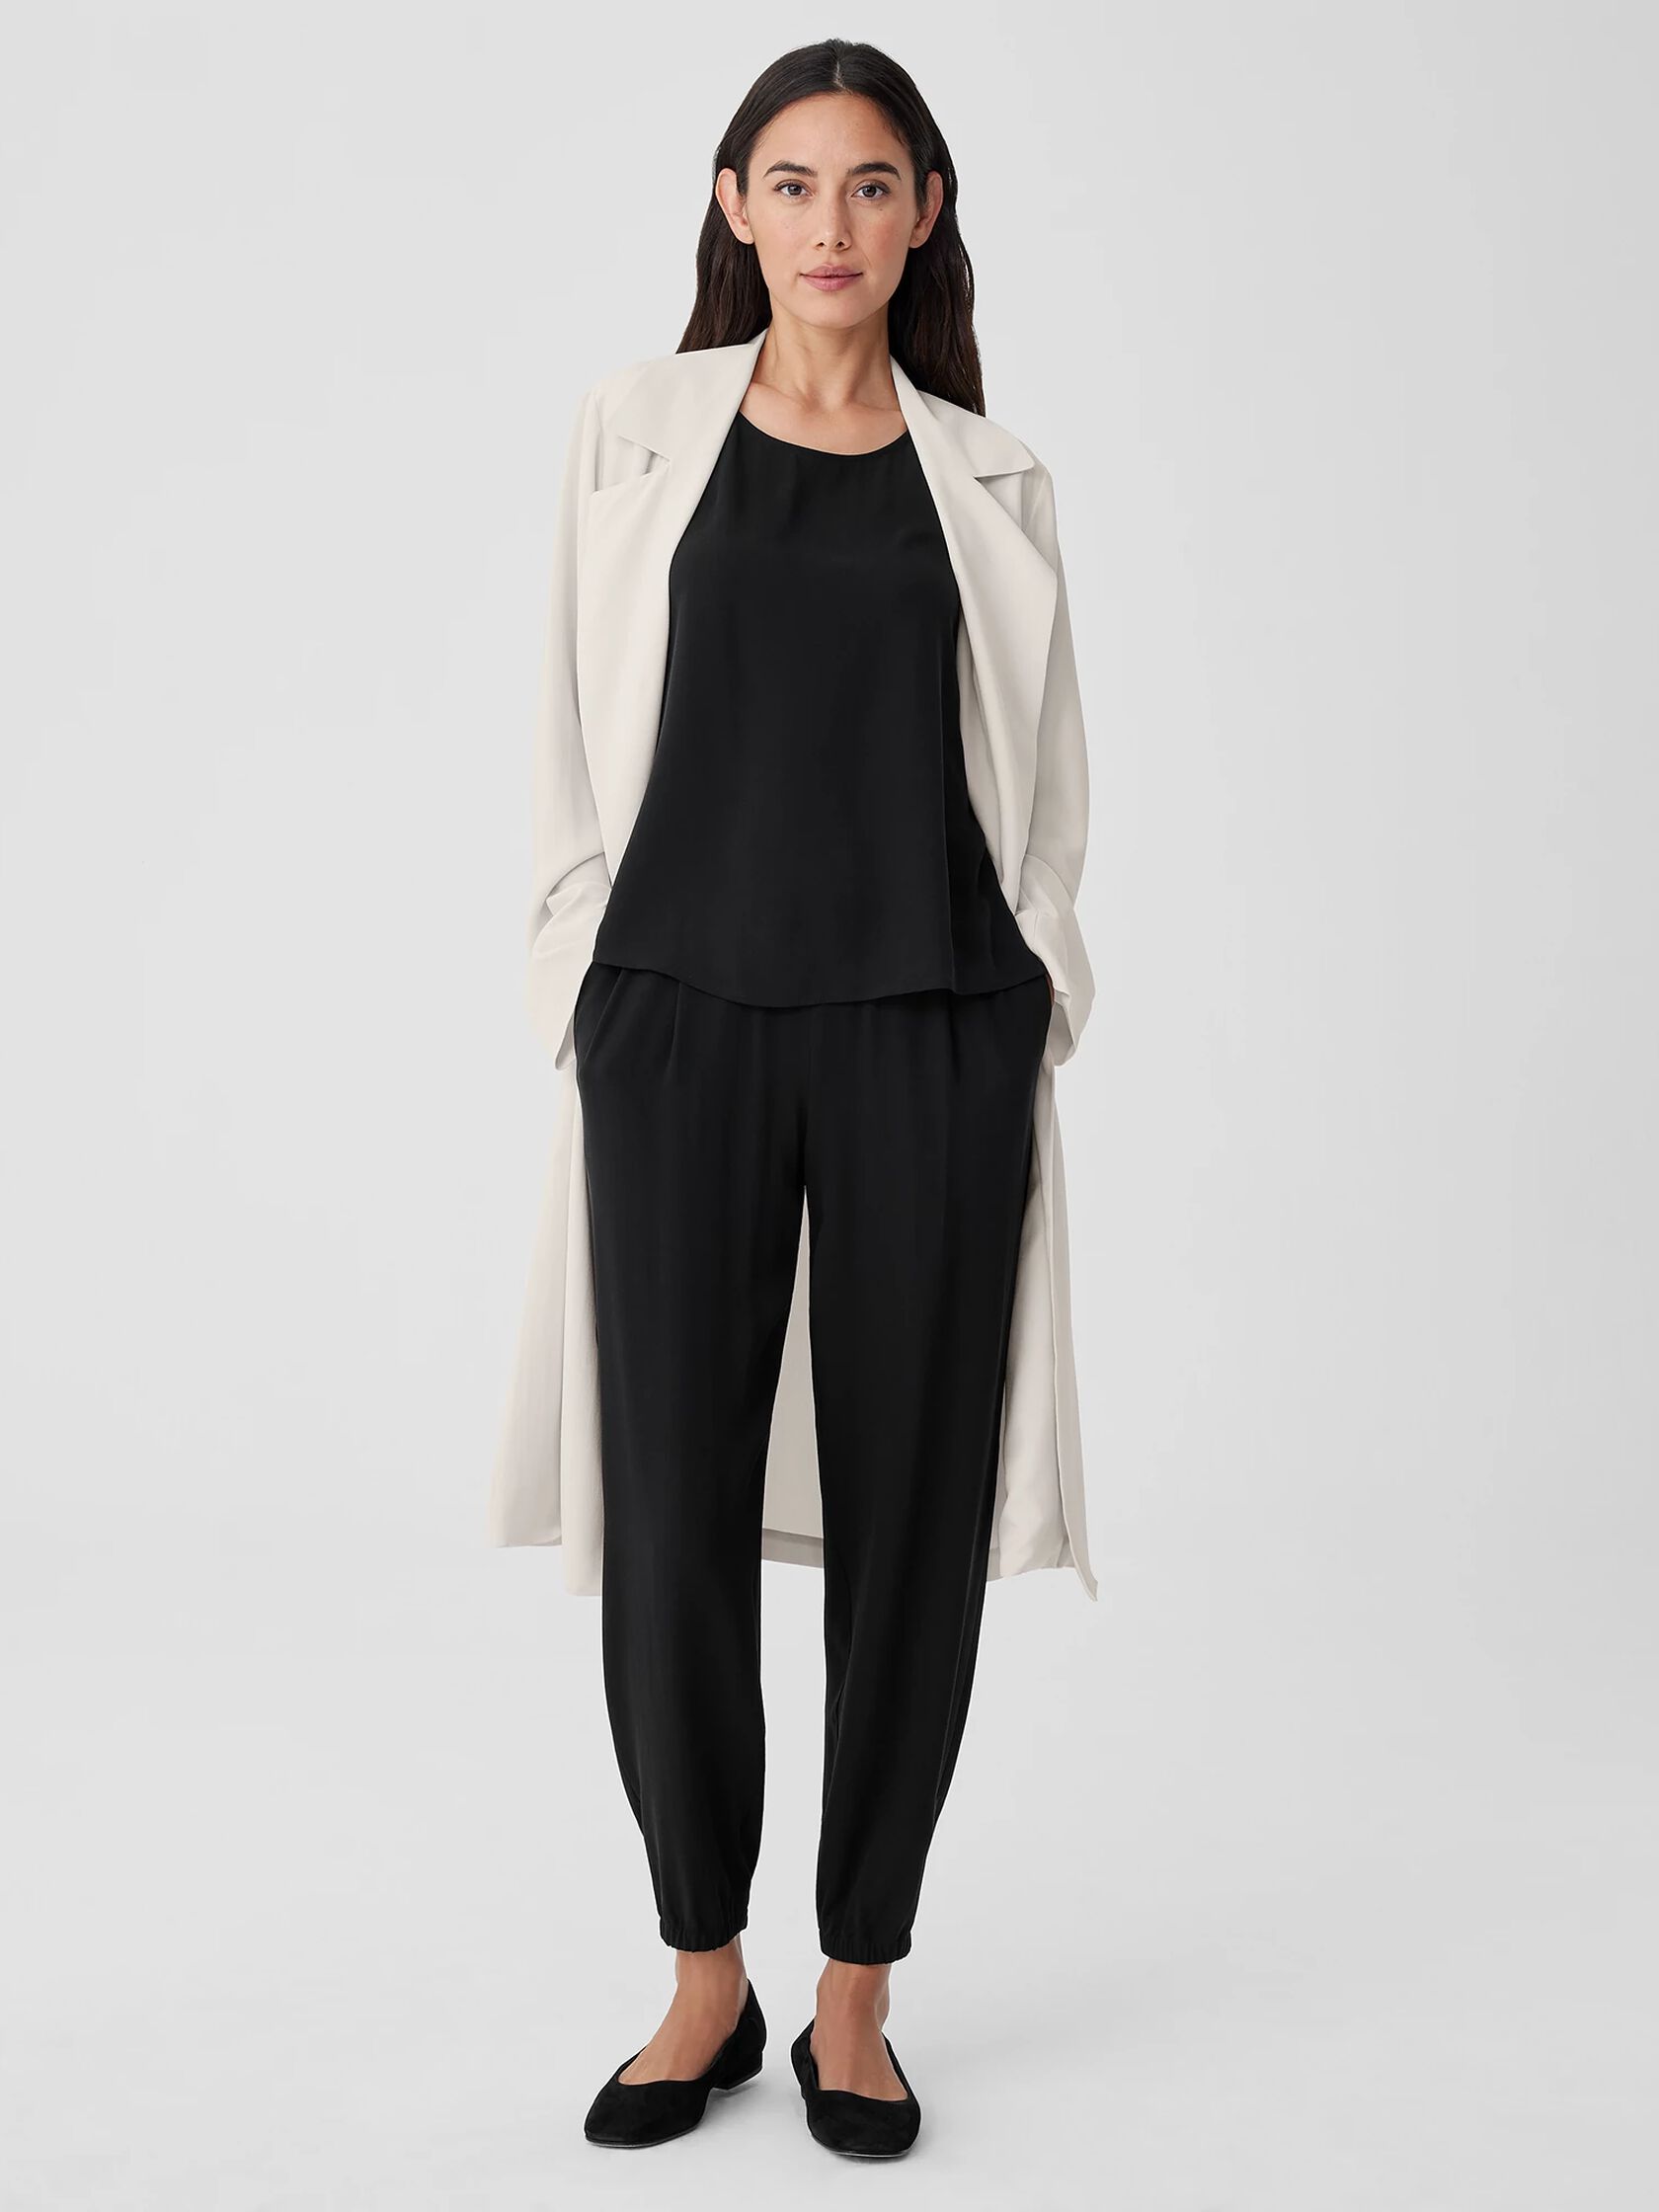 Silk Georgette Crepe Jogger Pant | EILEEN FISHER